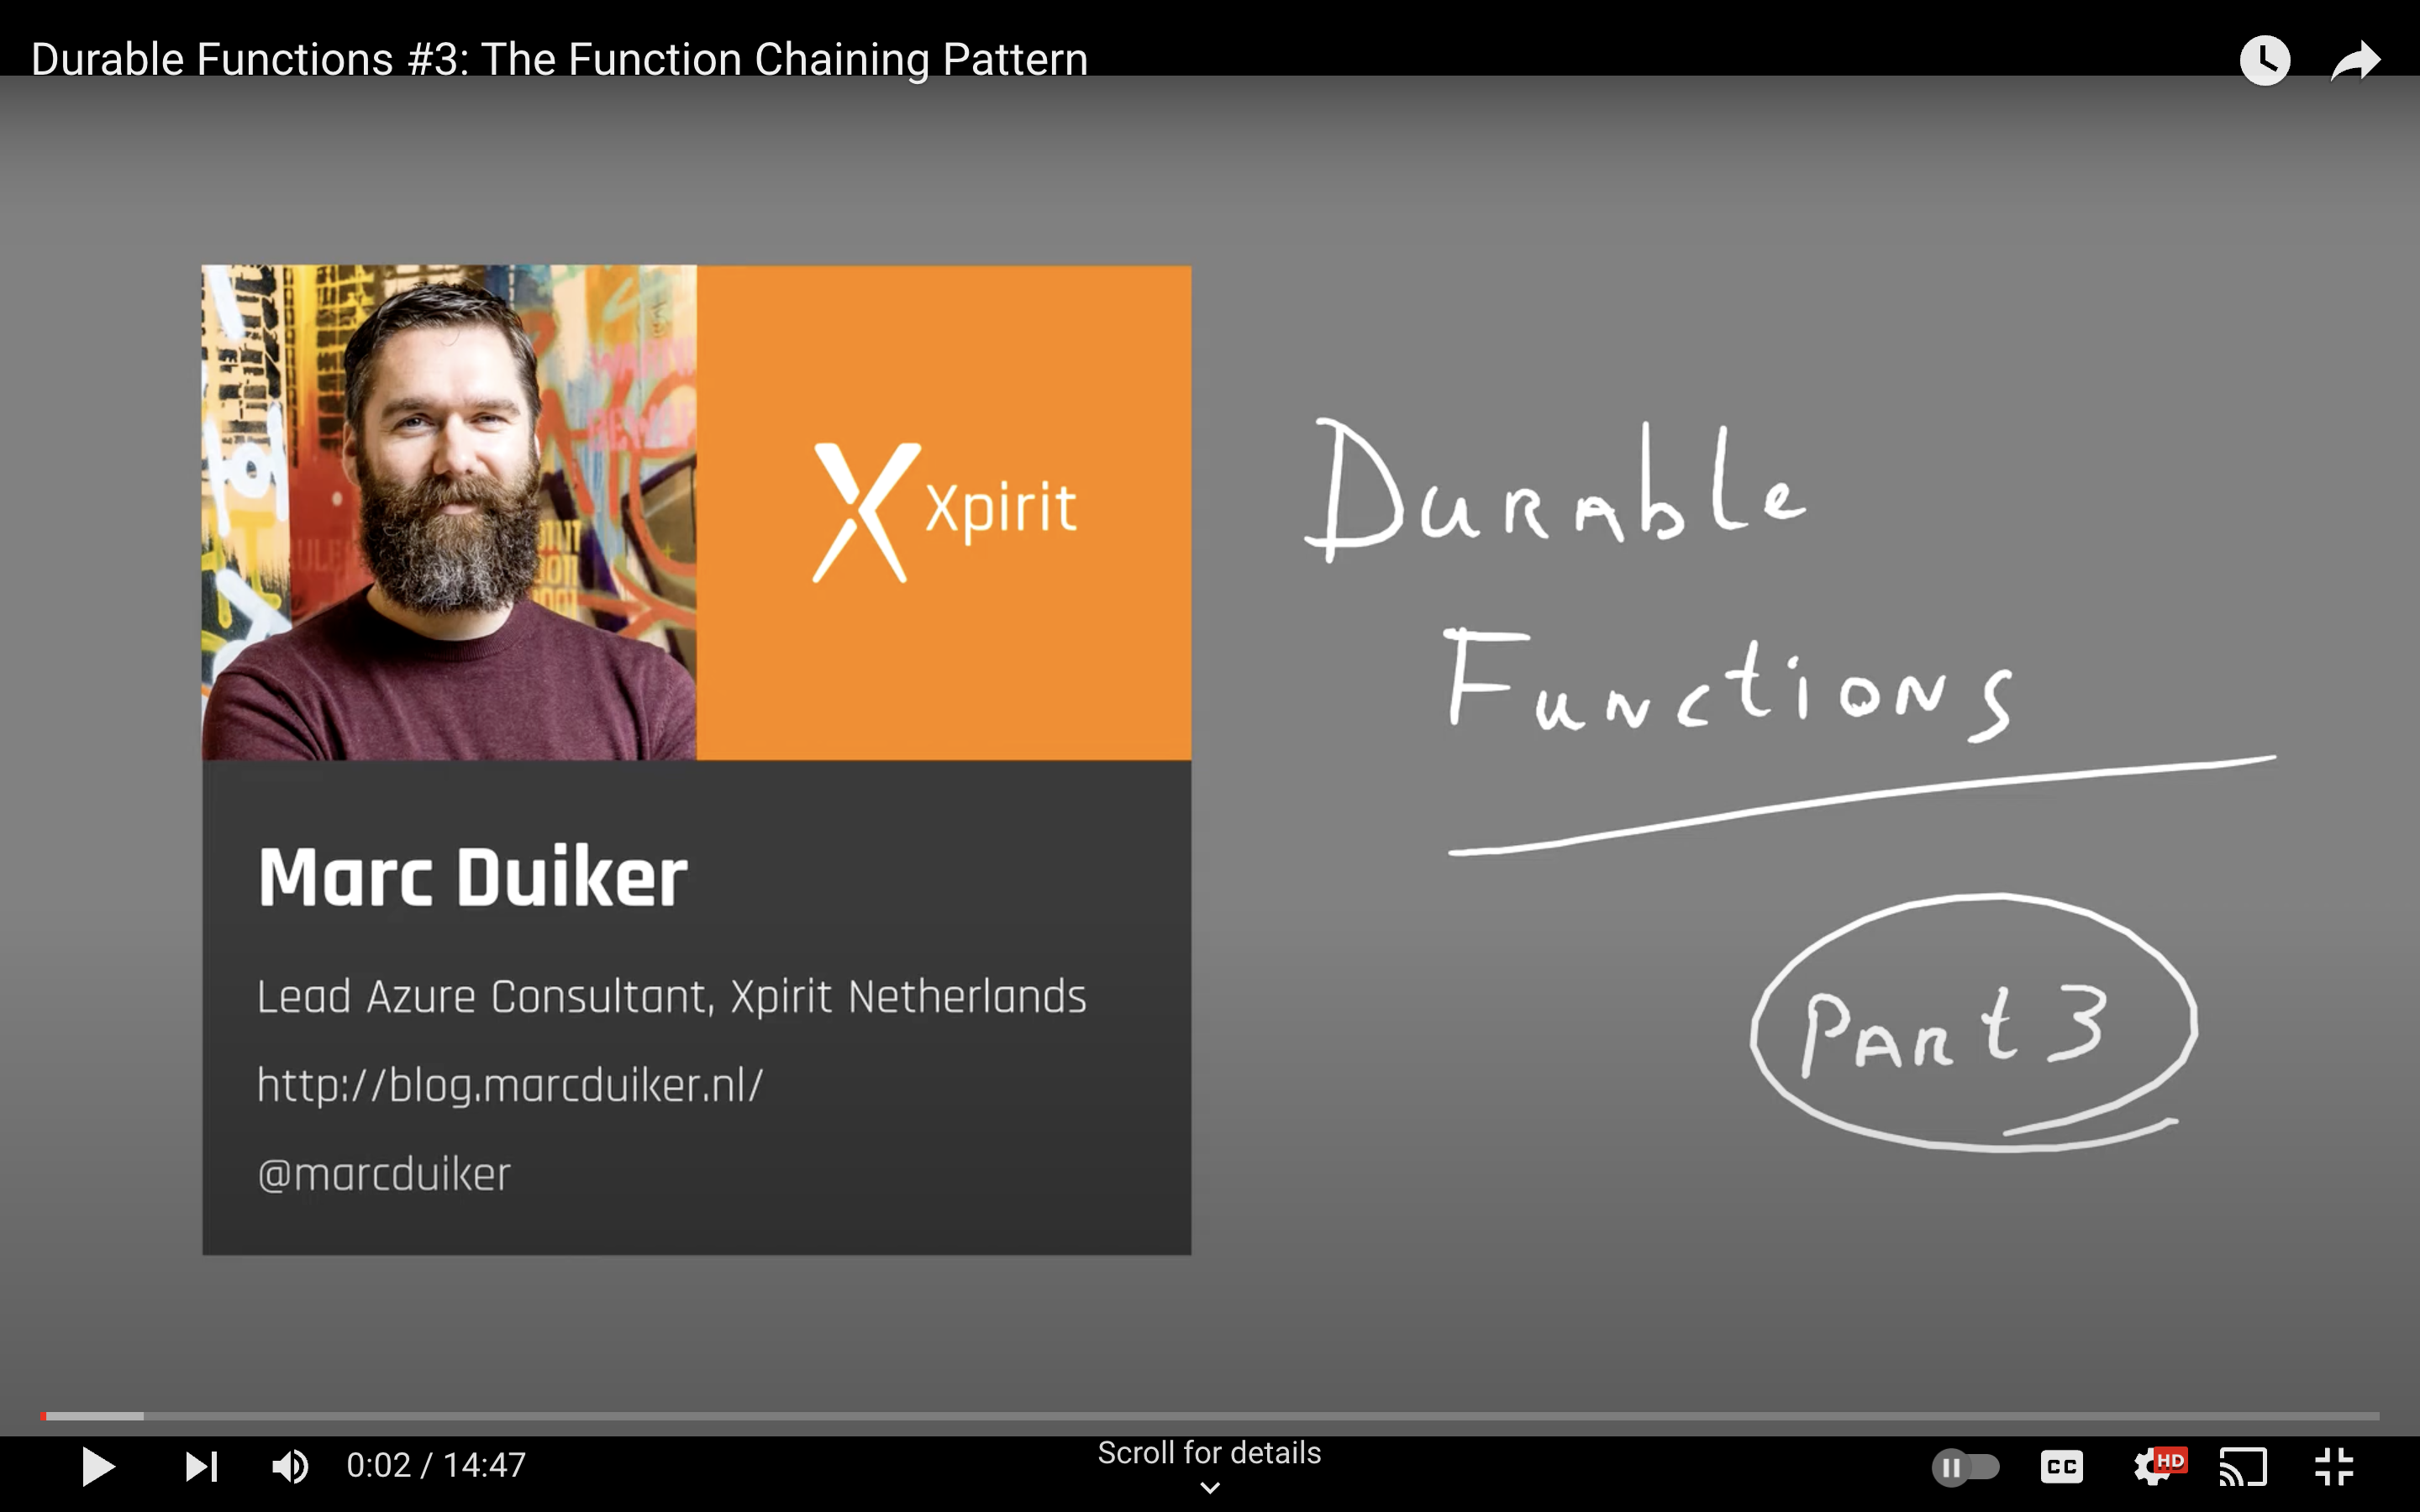 Durable Functions on YouTube (part 3) - The Function Chaining Pattern